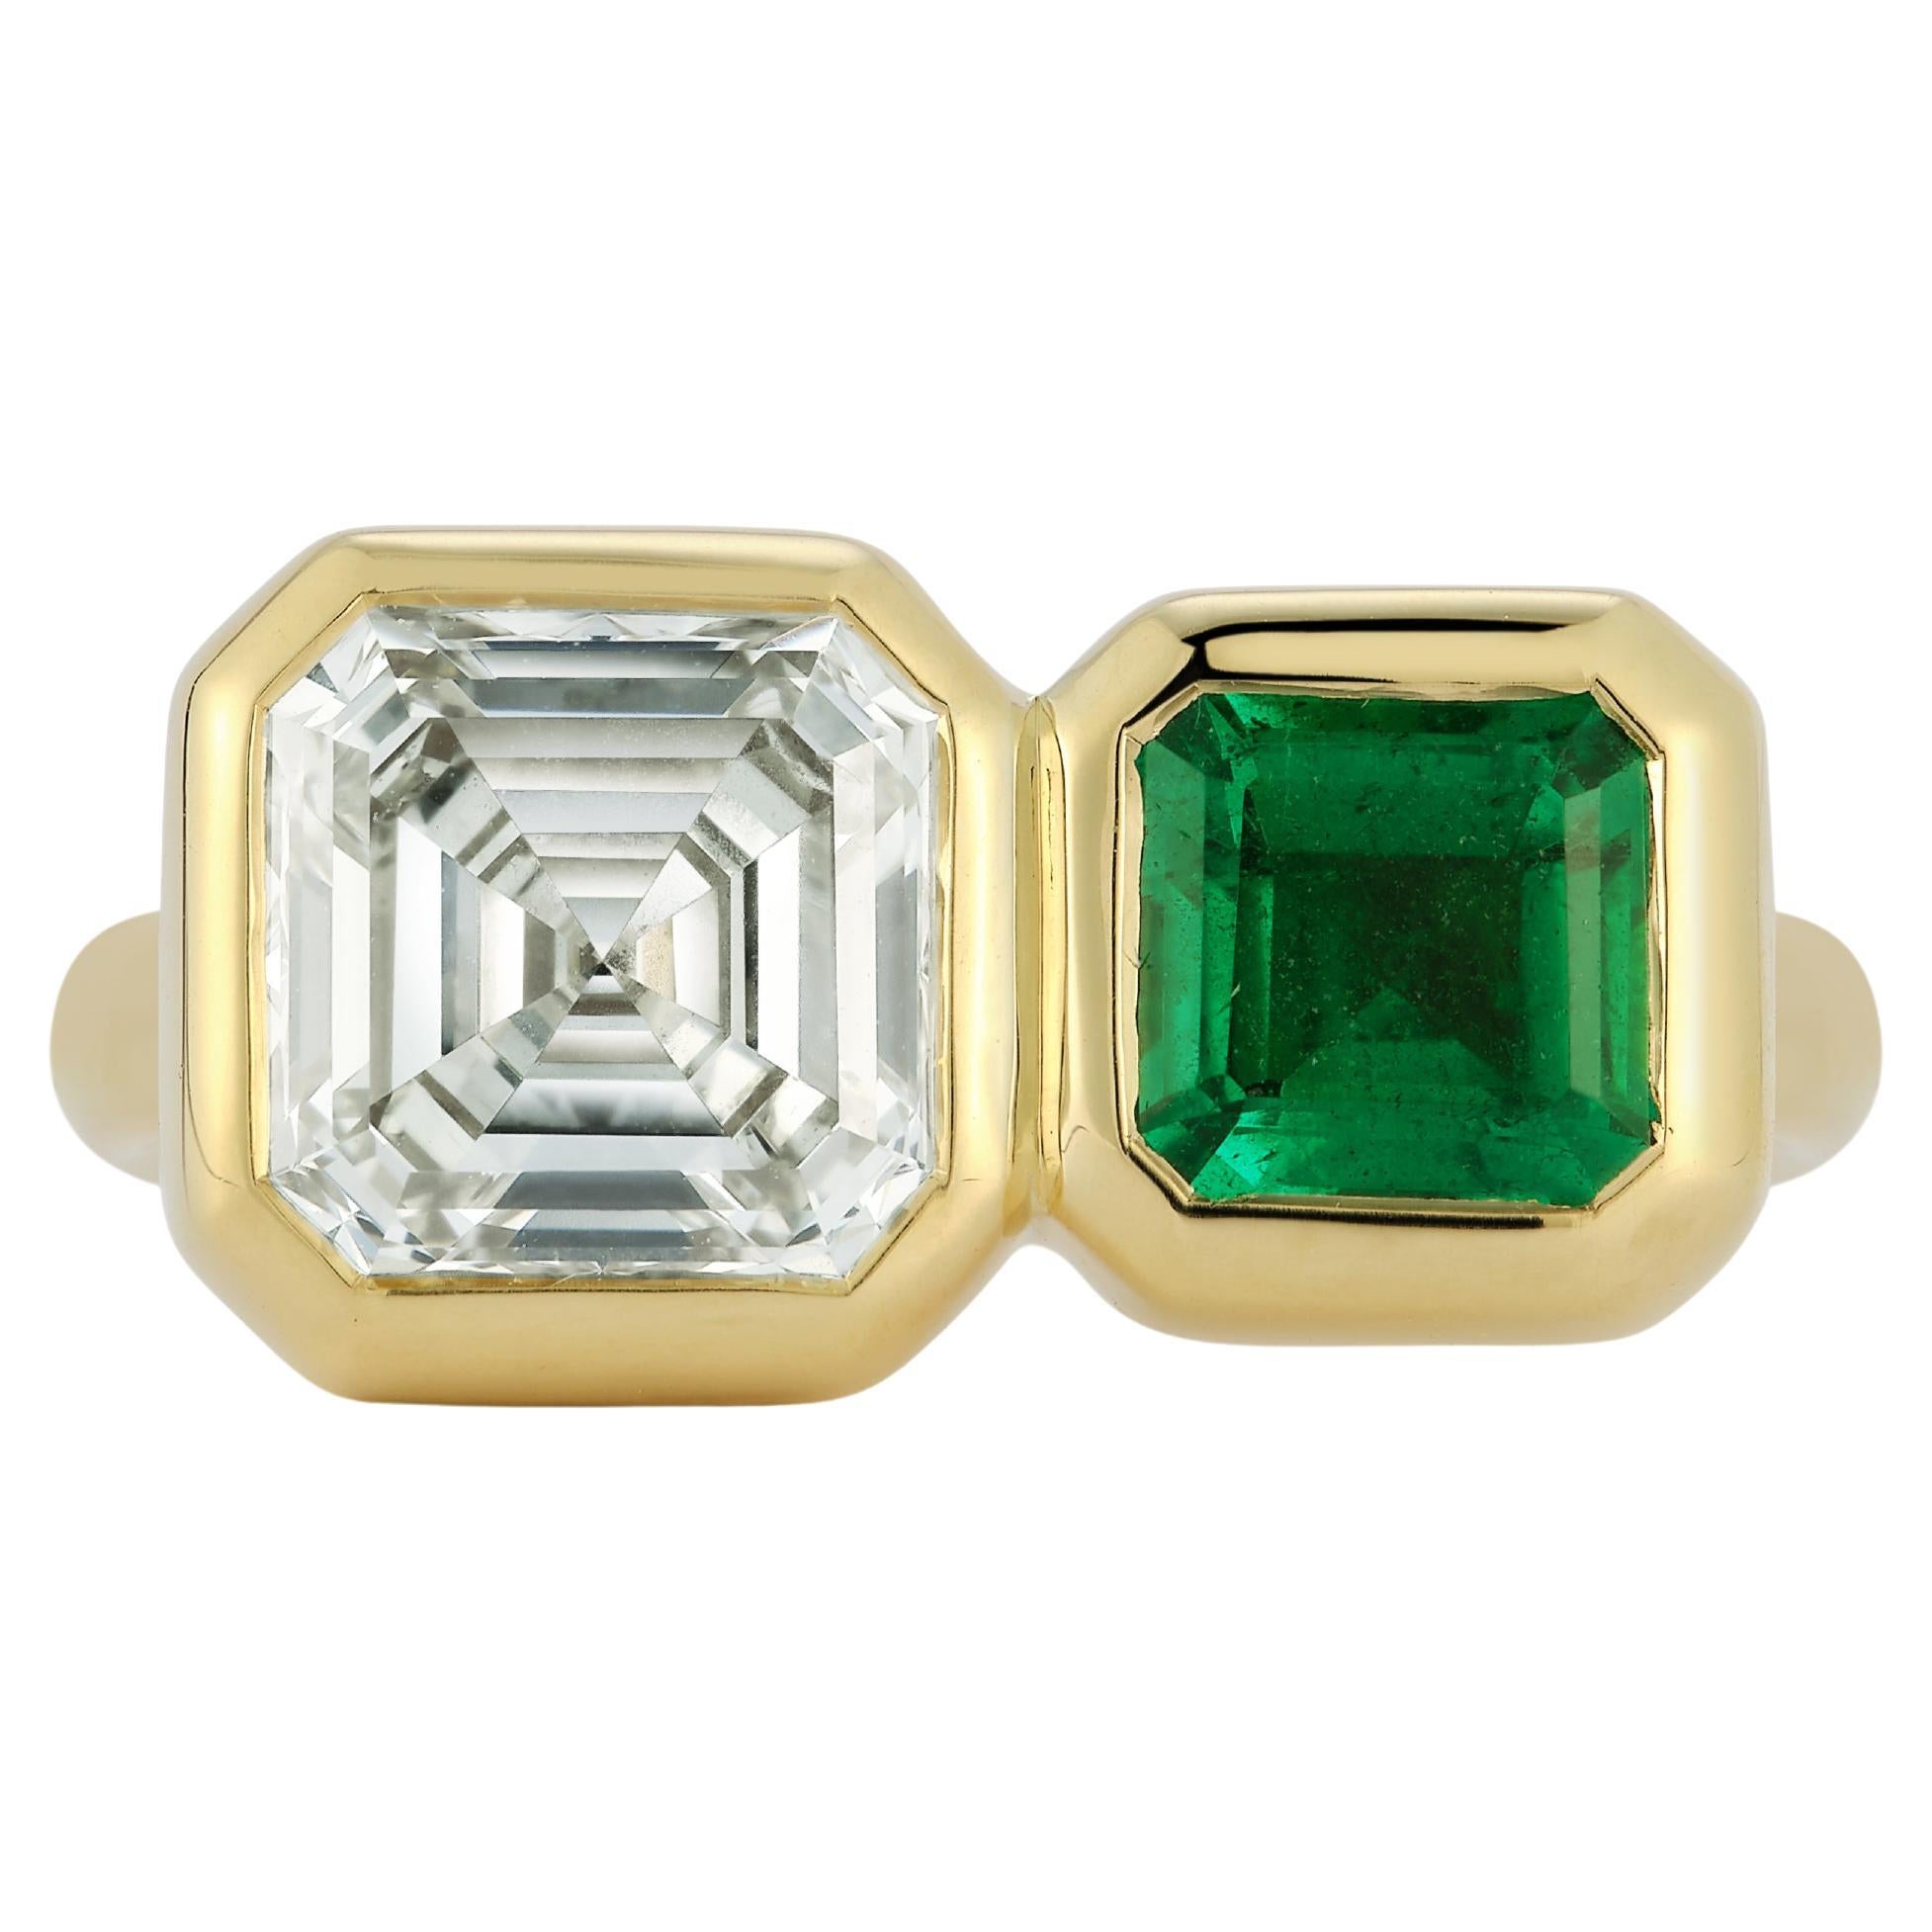 Our Diamond and emerald Duo Ring is a one of a kind piece. The diamond is an Antique stone repurposed from an old estate piece of jewelry. The cut and color is magical! 
The emerald is a rich kelly green of Zambian origin. The mix of Diamond and